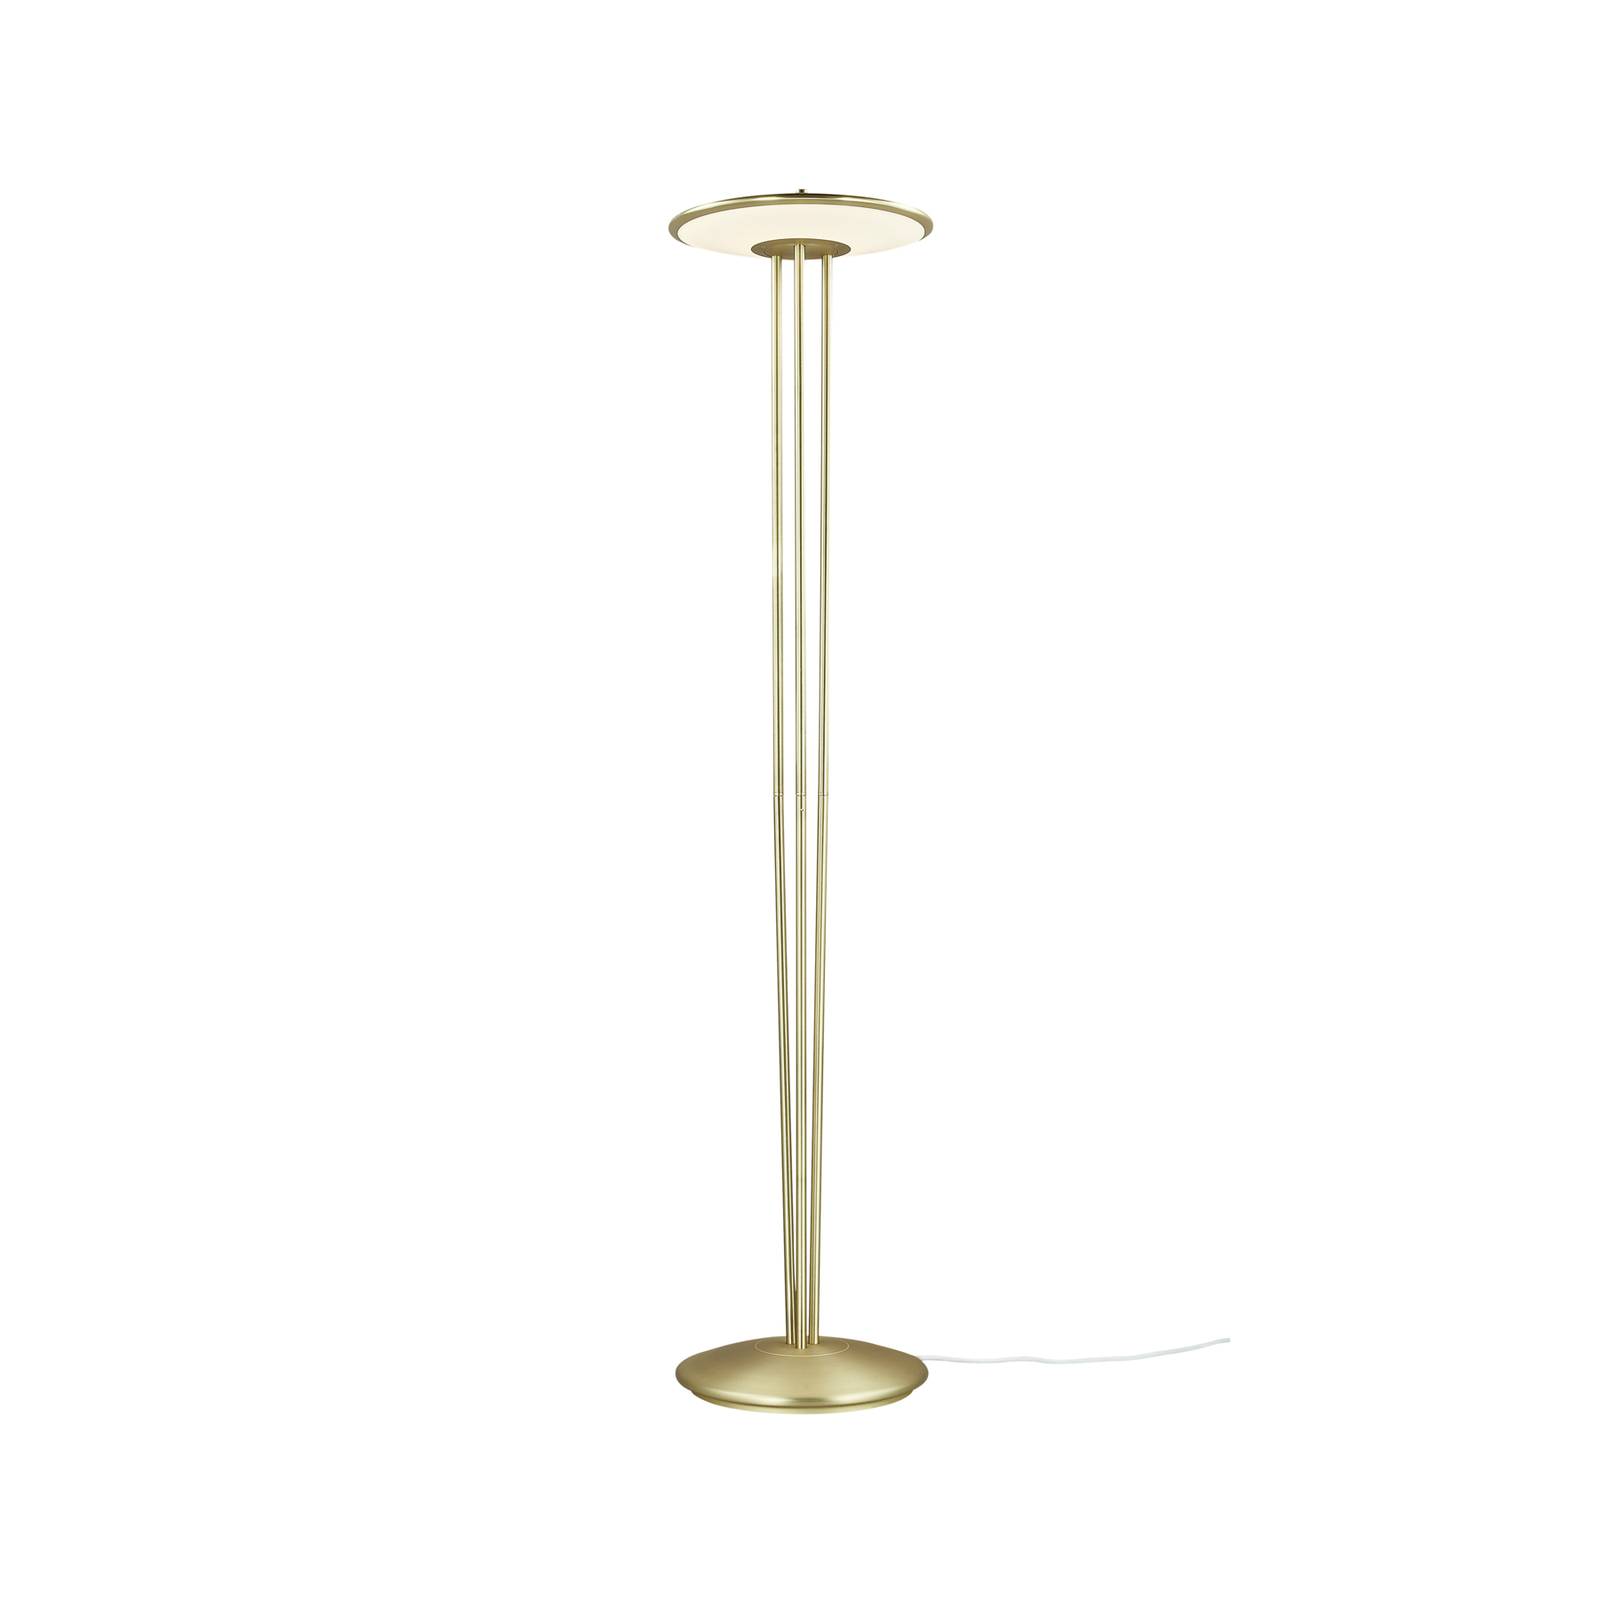 Image of Lampadaire LED Blanche avec fonction dimmable 5704924004230